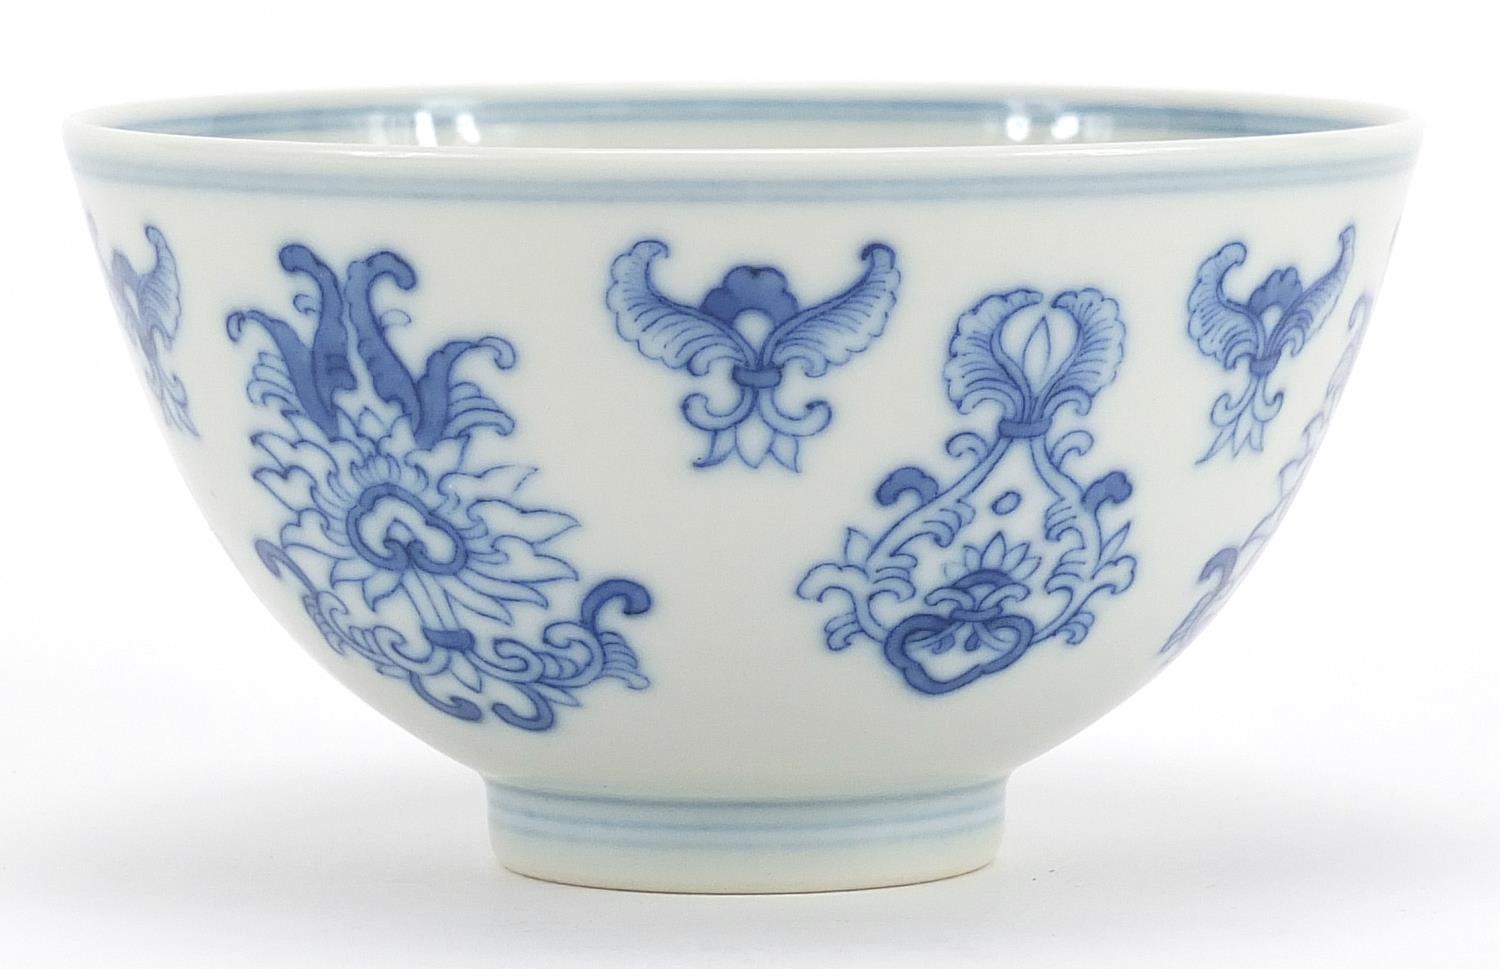 Chinese blue and white porcelain footed bowl hand painted with flowers, six figure character marks - Image 2 of 3